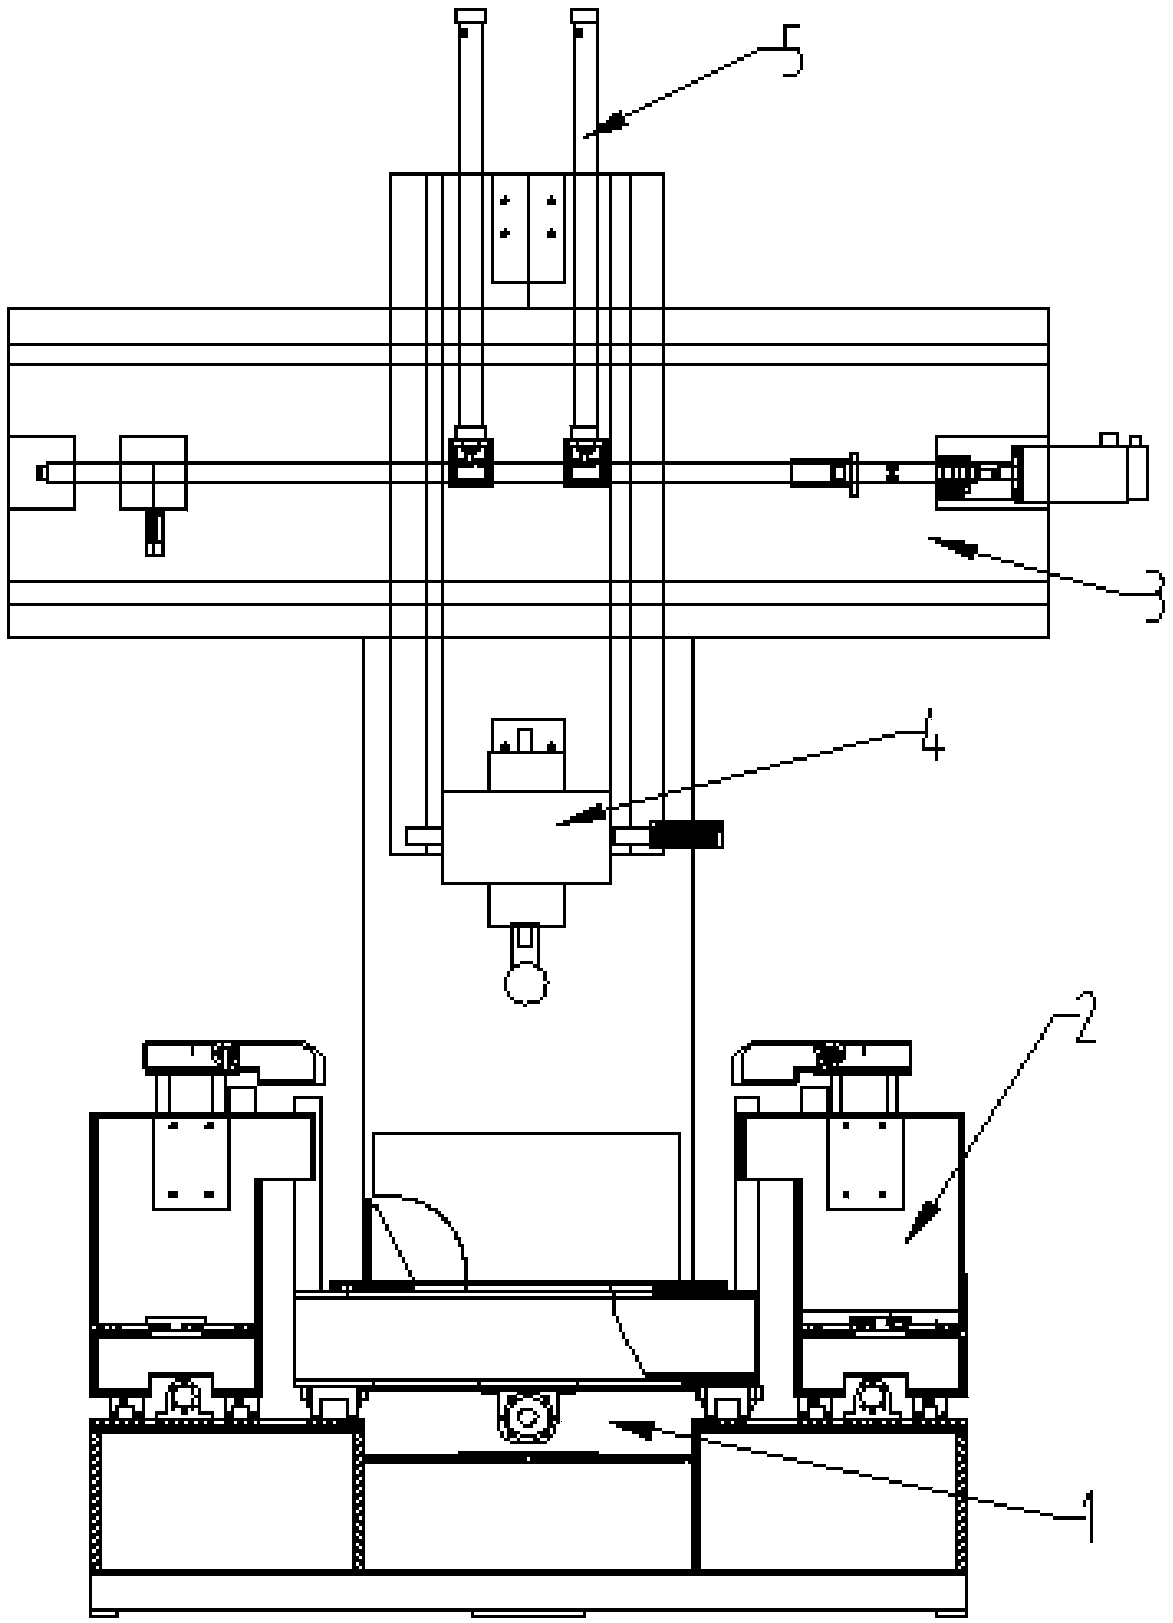 Seven-axis five-linkage wood plug CNC machining center and method